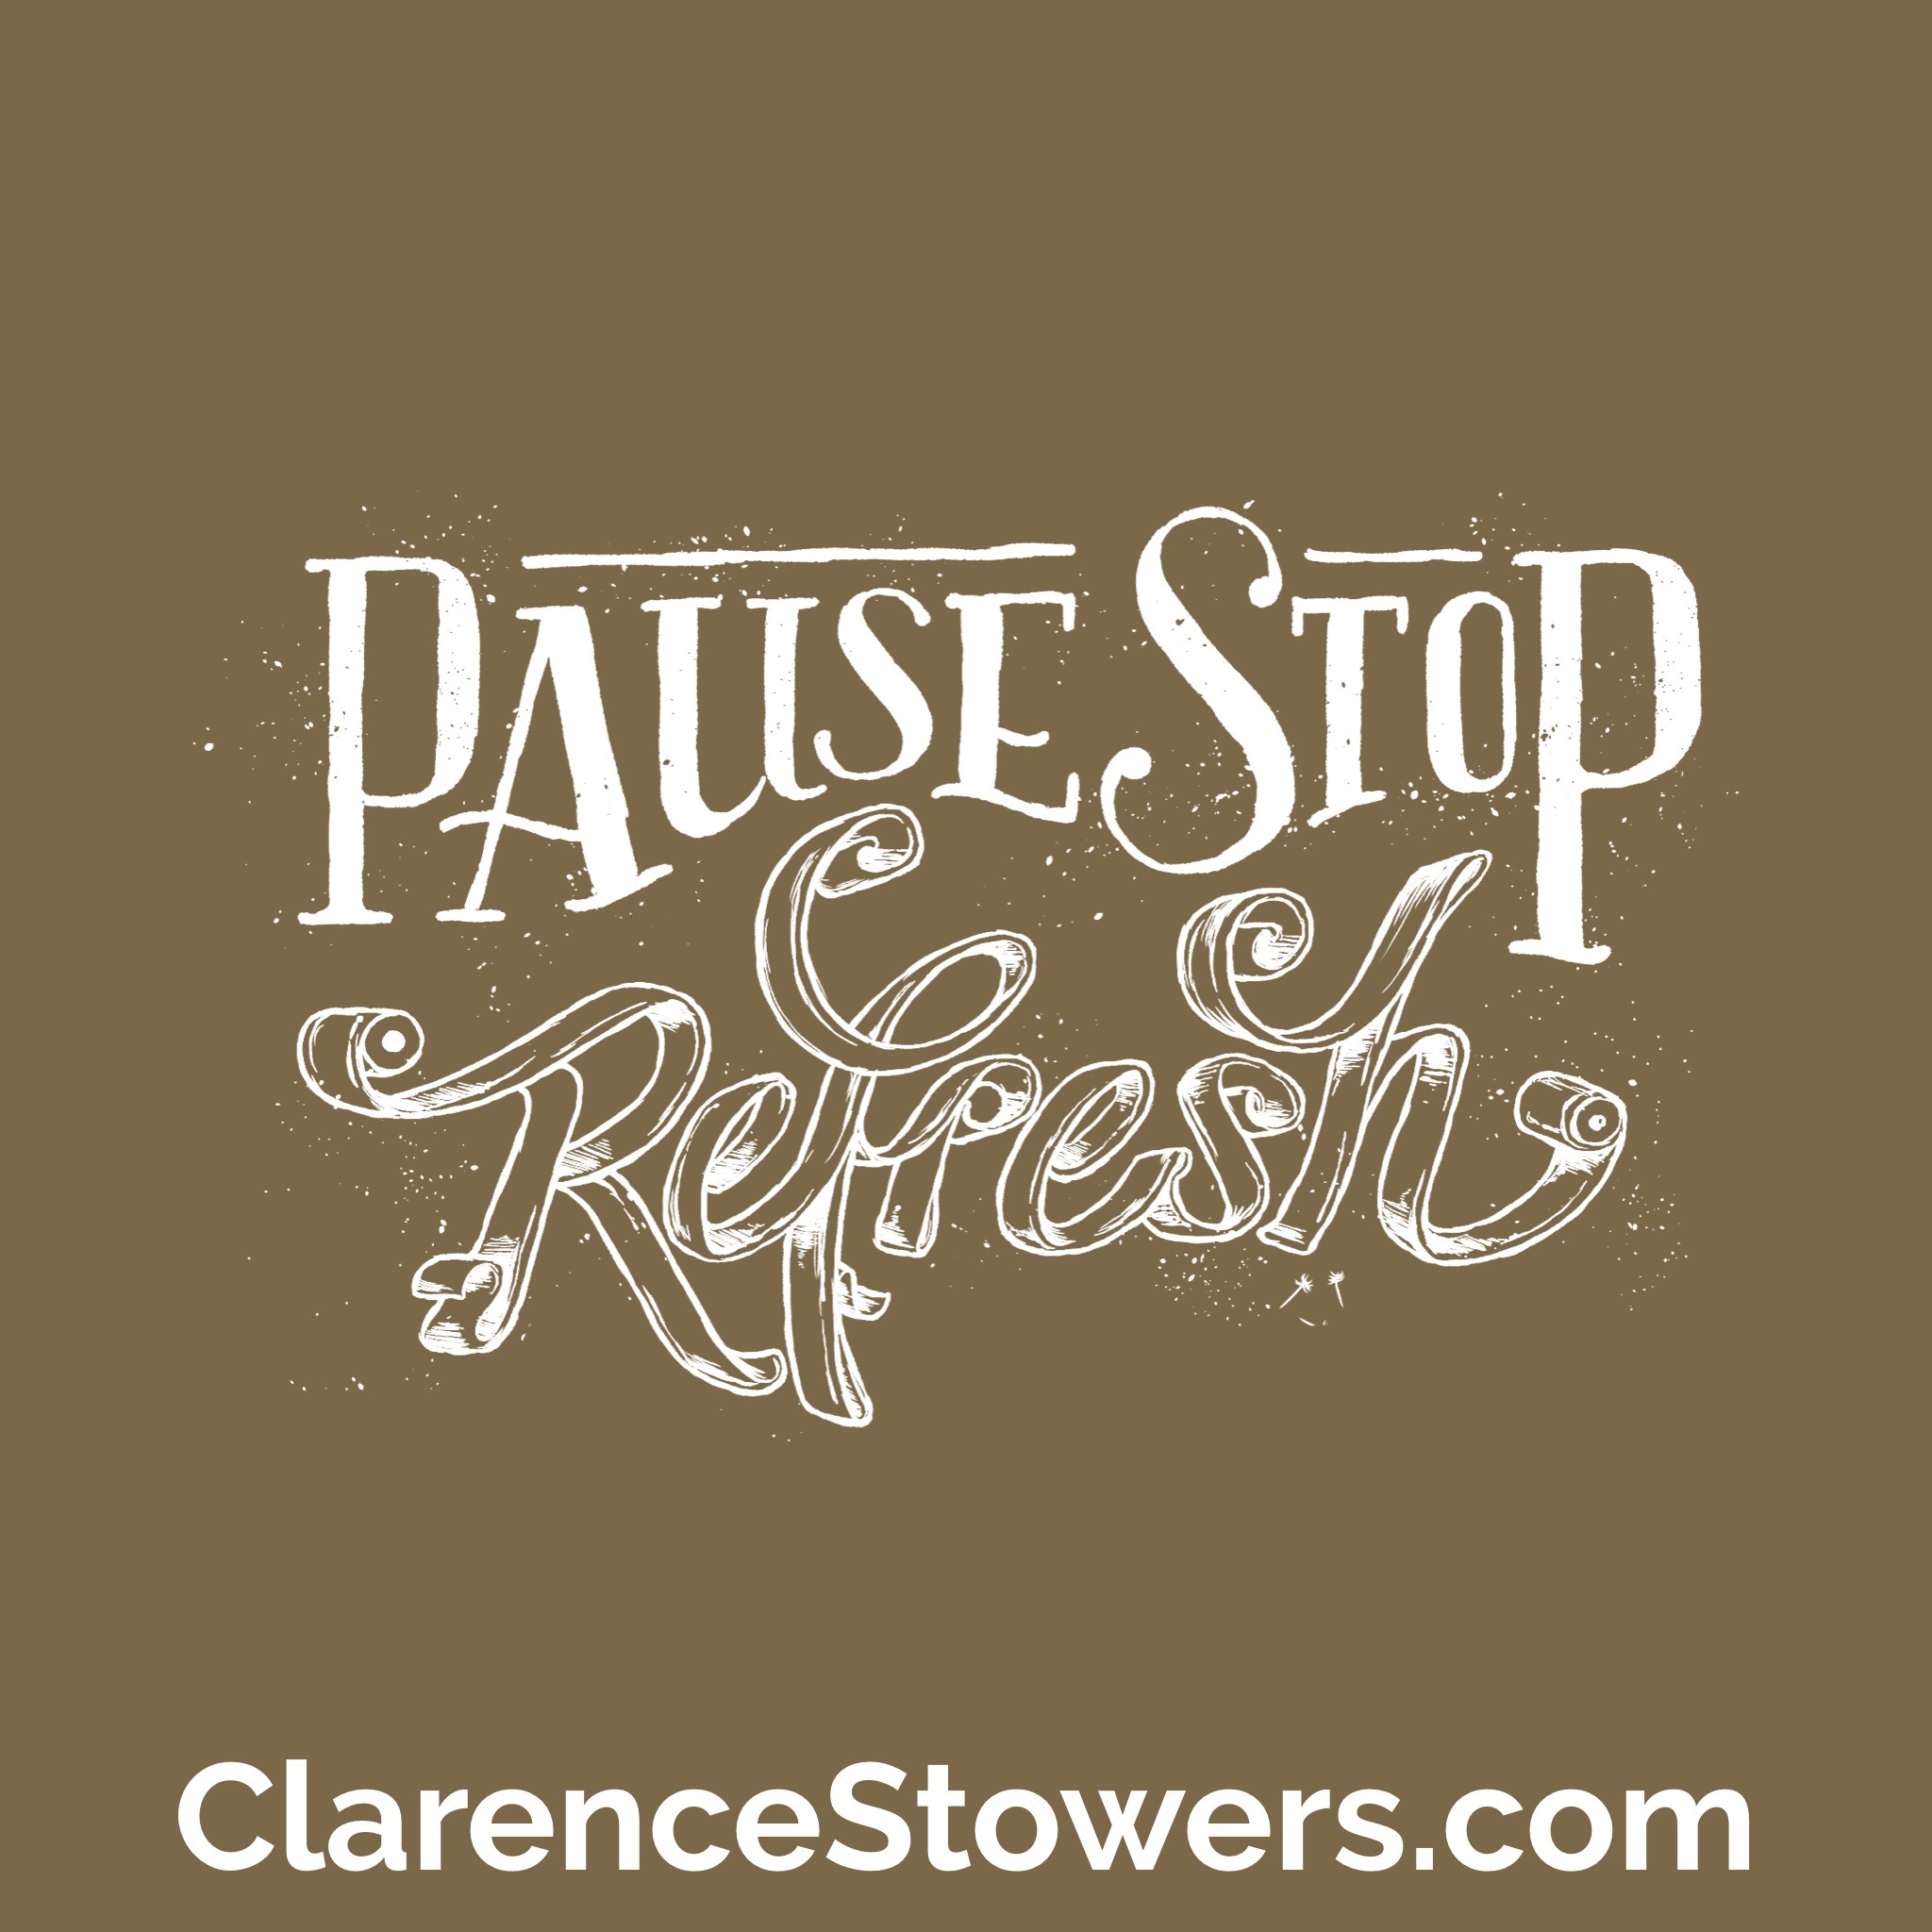 Pause, Stop, and Refresh